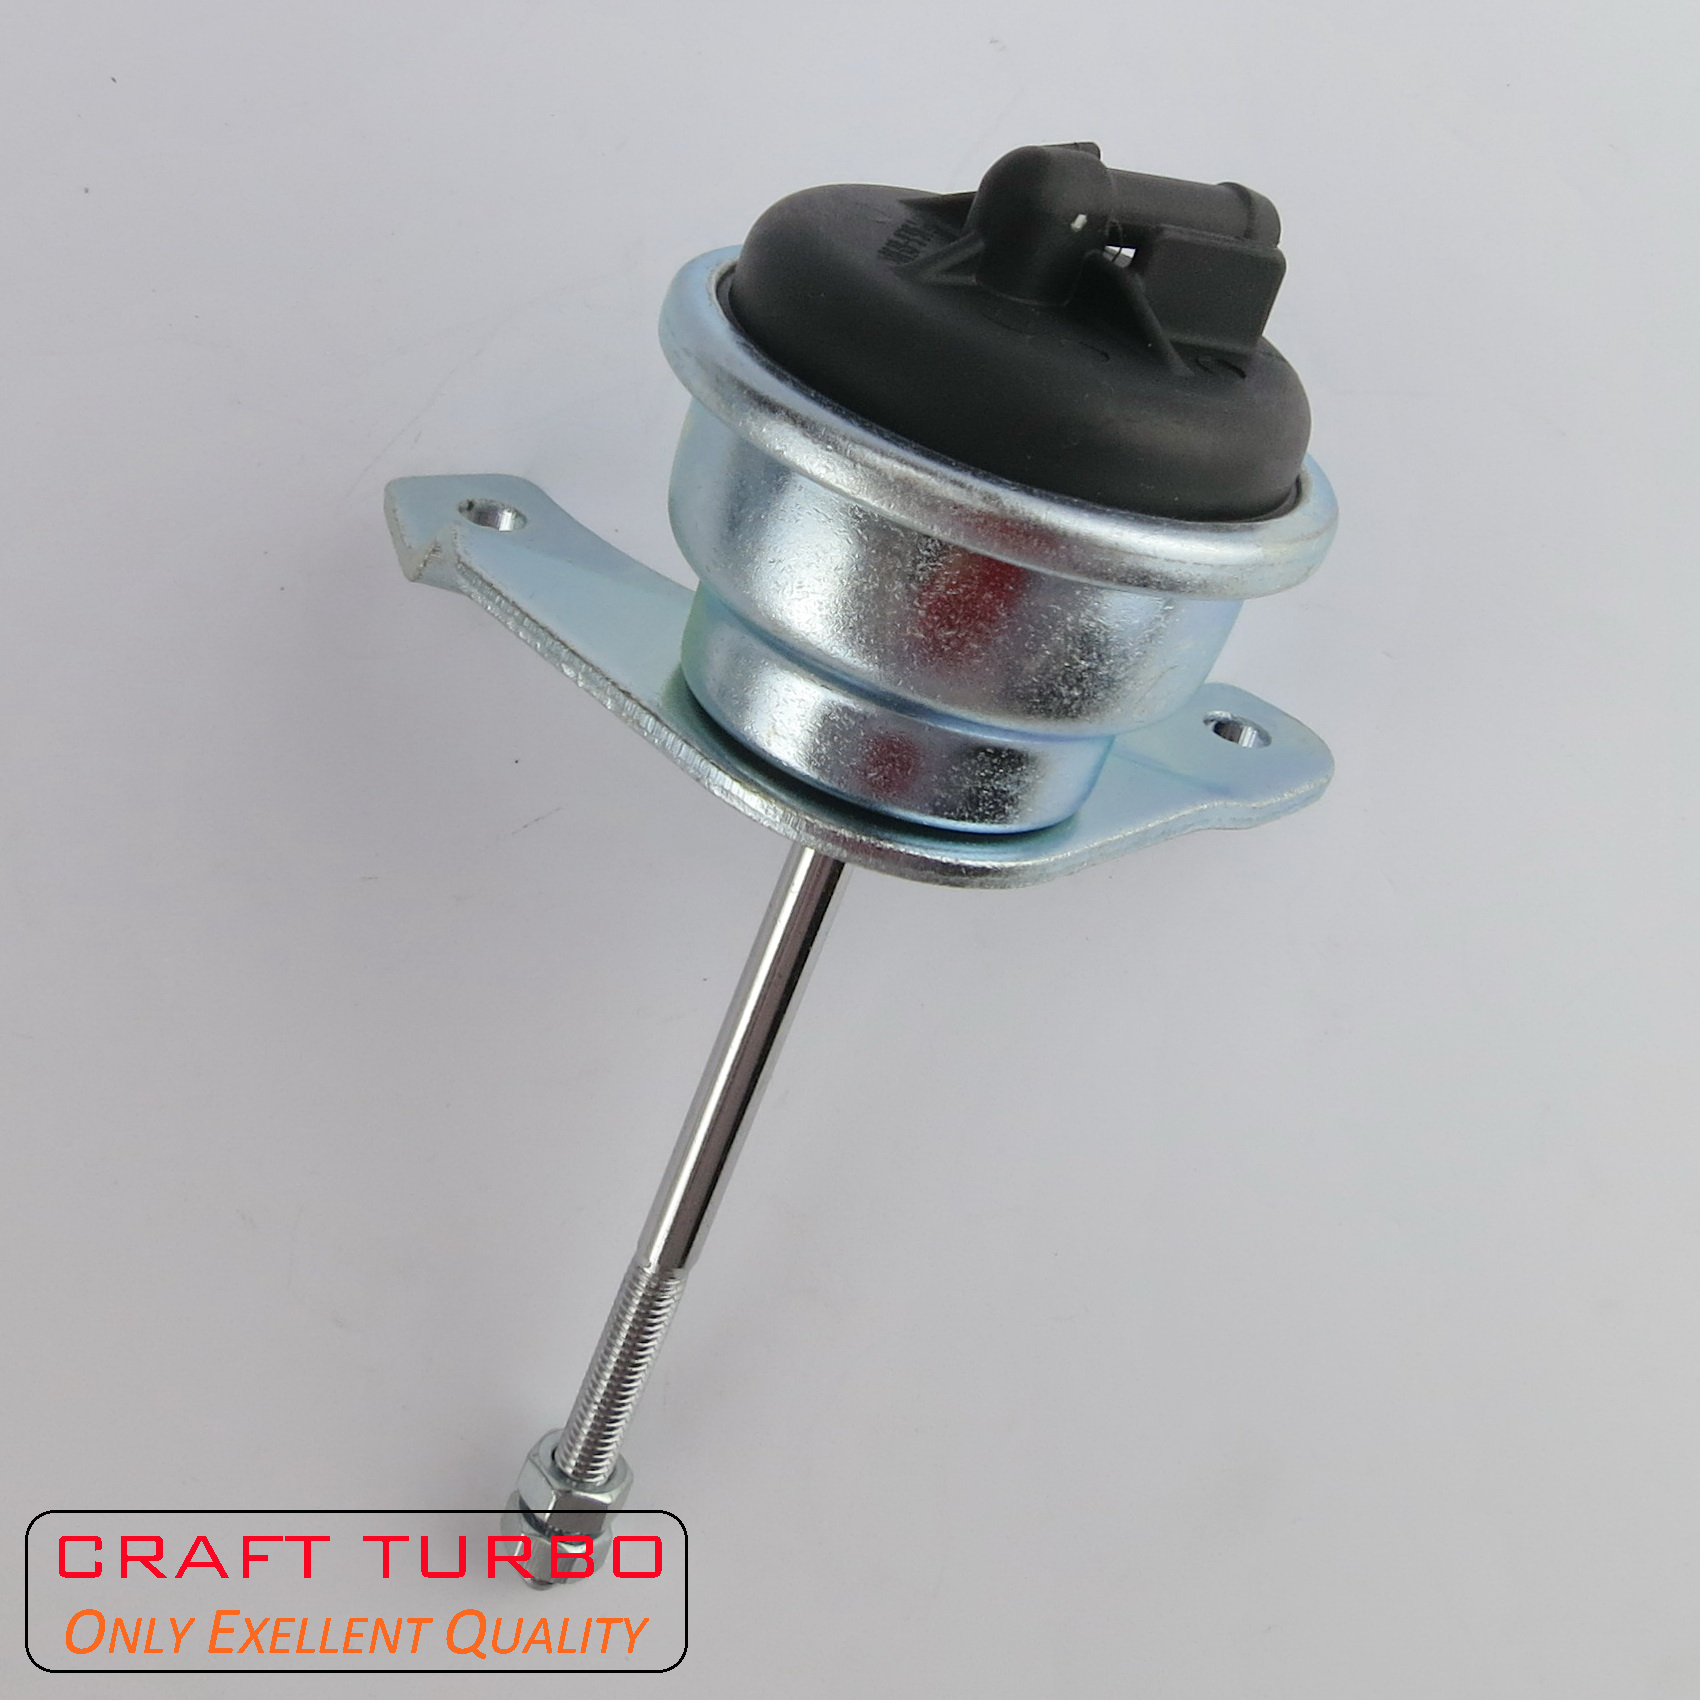 KP35 58201104180/ 5435-988-0009/ 5435-988-0001/ 5435-988-0007/ 5435-970-0001 Actuator for Turbochargers 